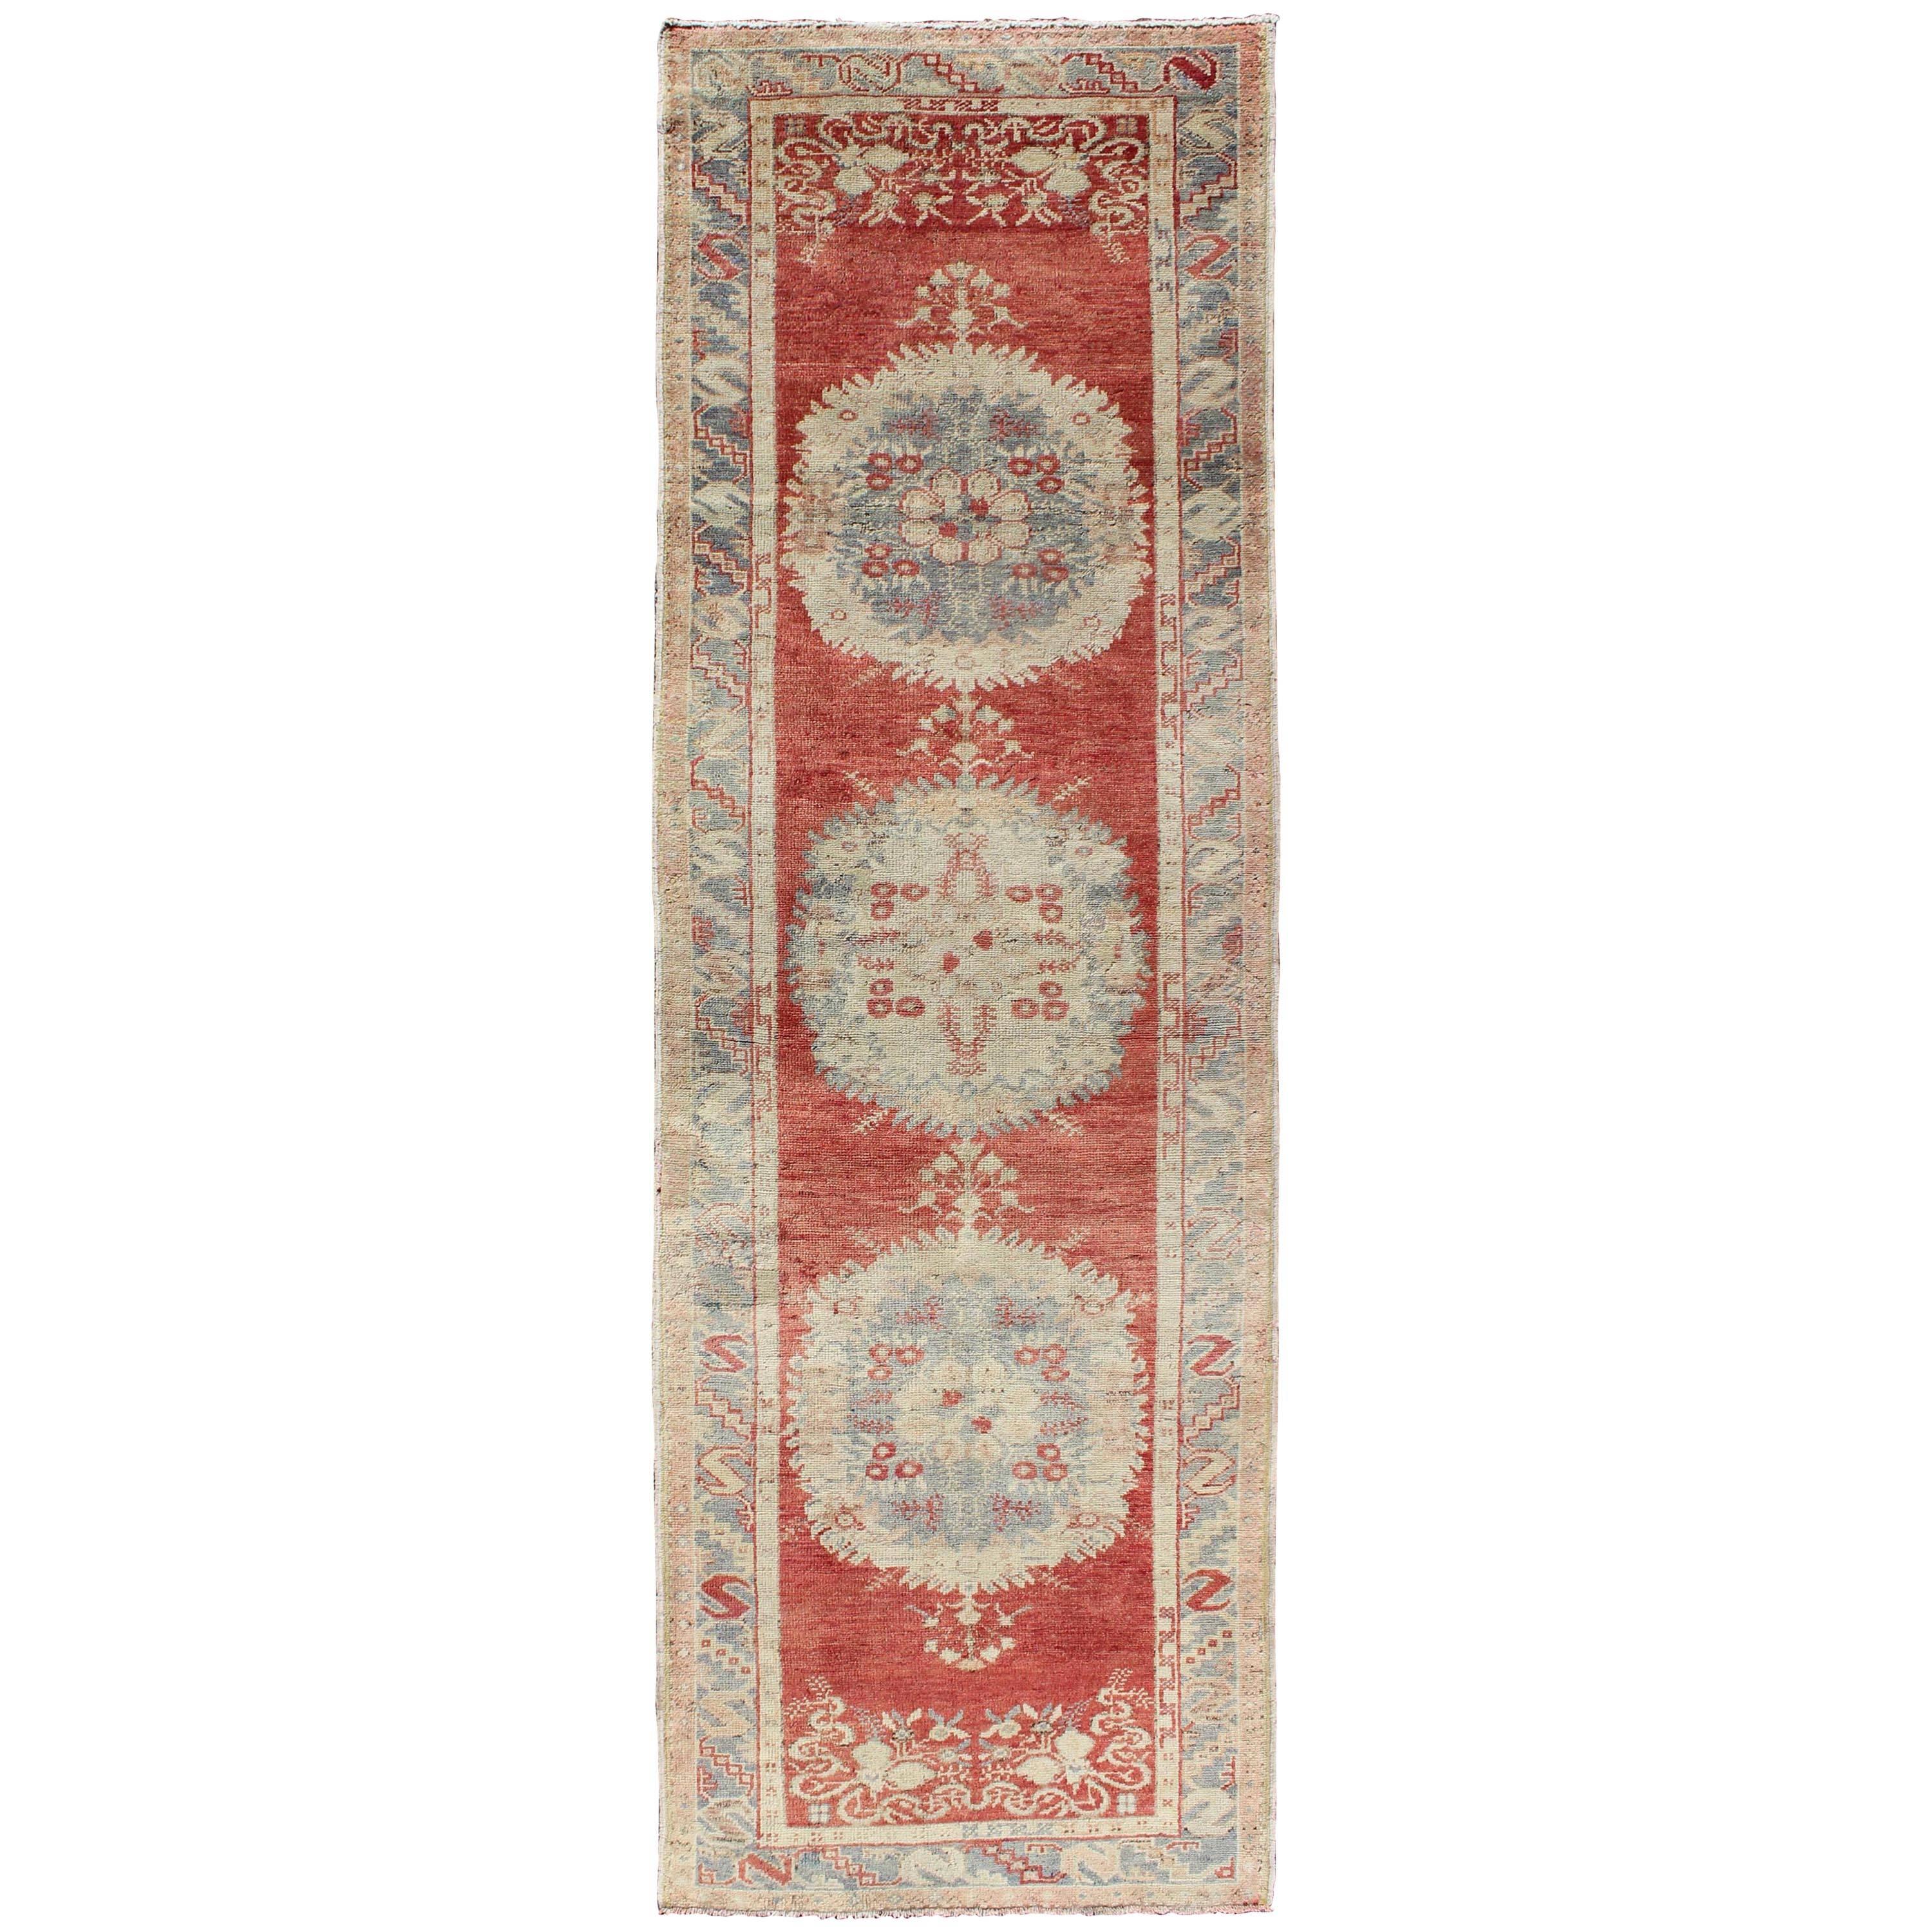 Vintage Turkish Oushak Runner with Three Floral Medallions in Red, Ivory, Grey